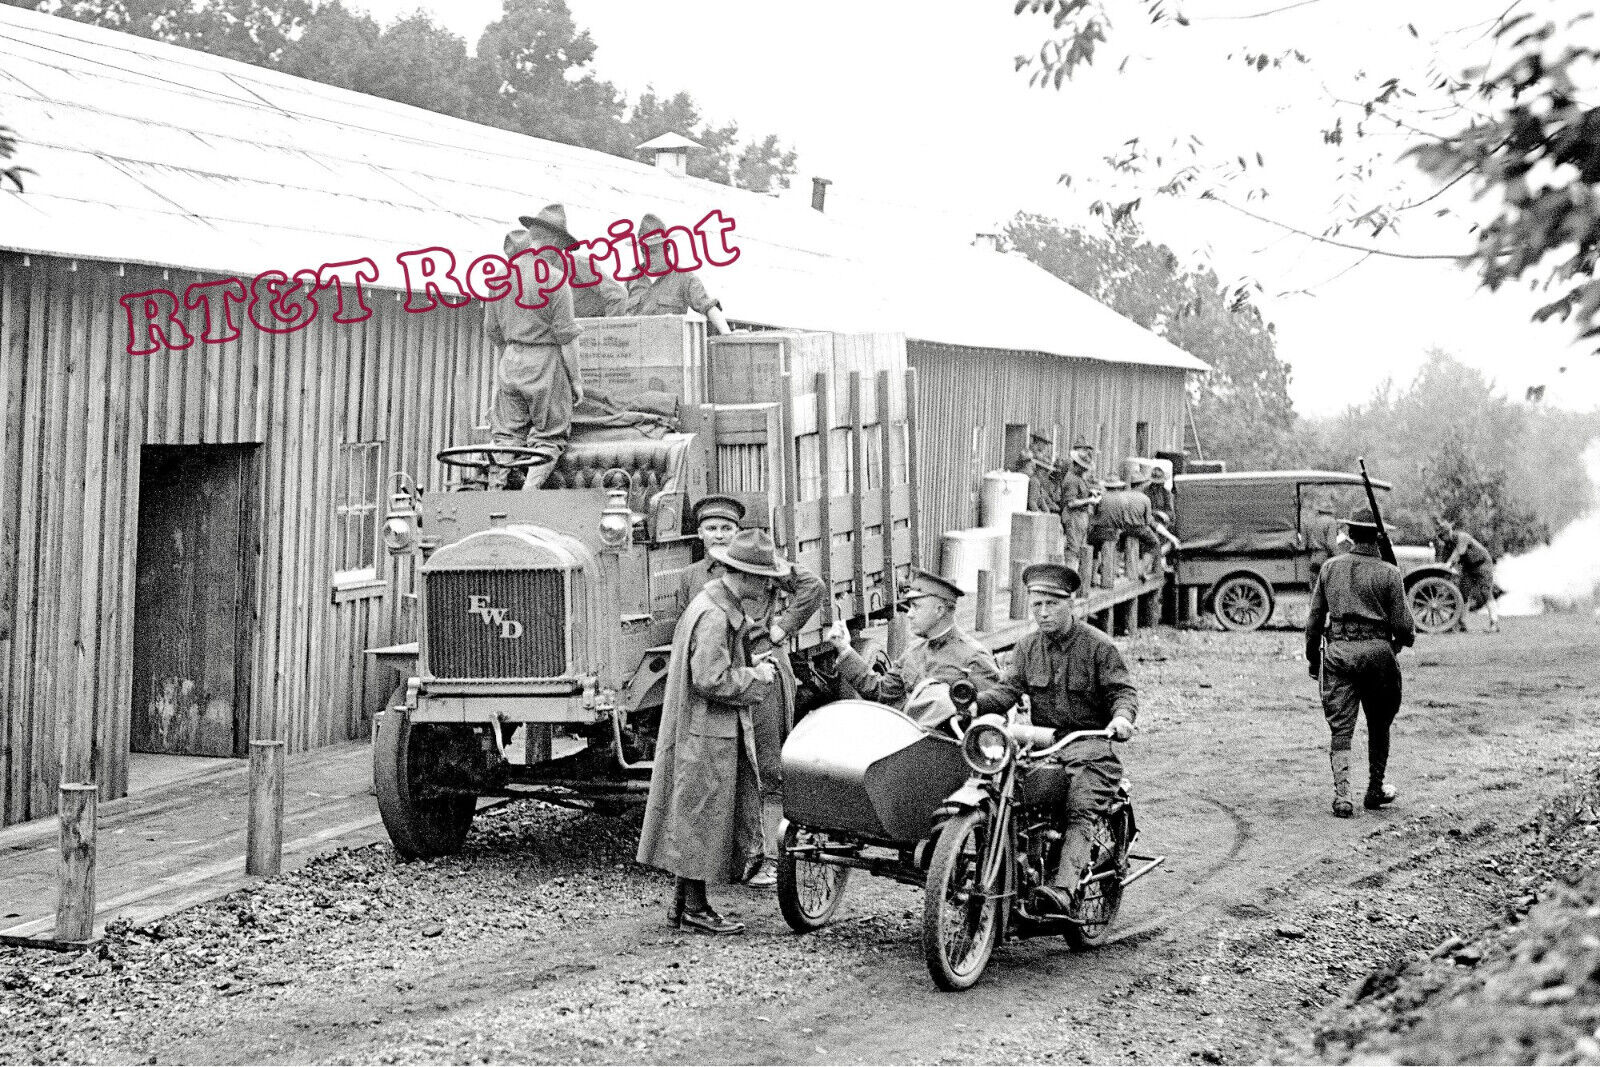 WWI US  ARMY Motorcycle & Sidecar 1917  Photo